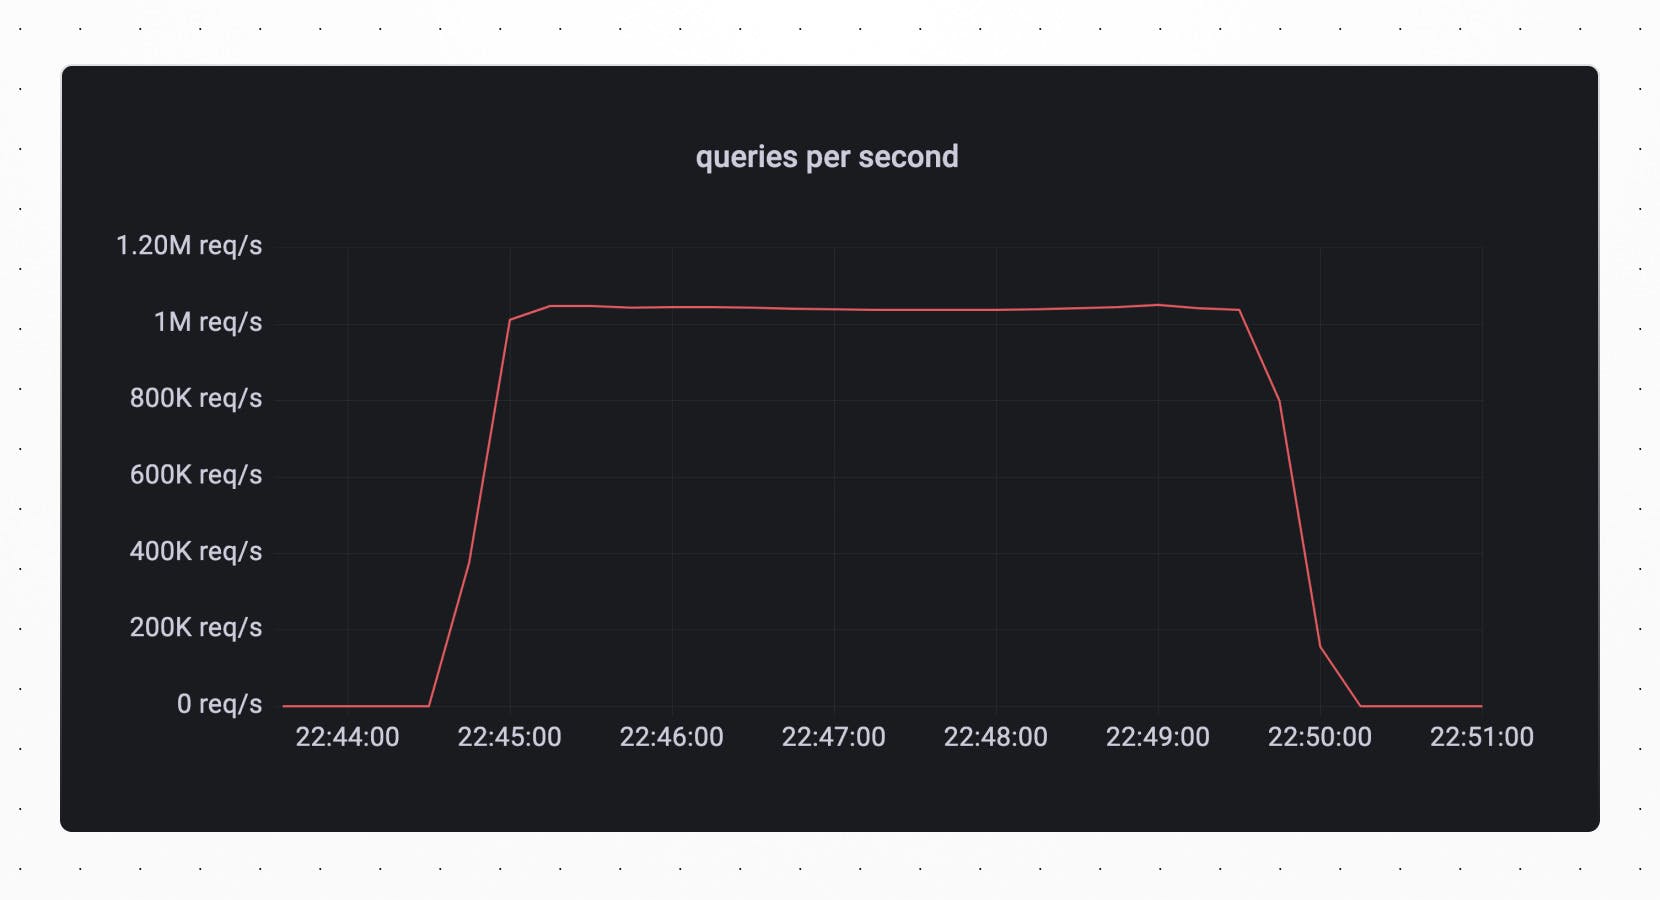 Graph showing queries per second peaking just over 1M req/s over a 5 minute period